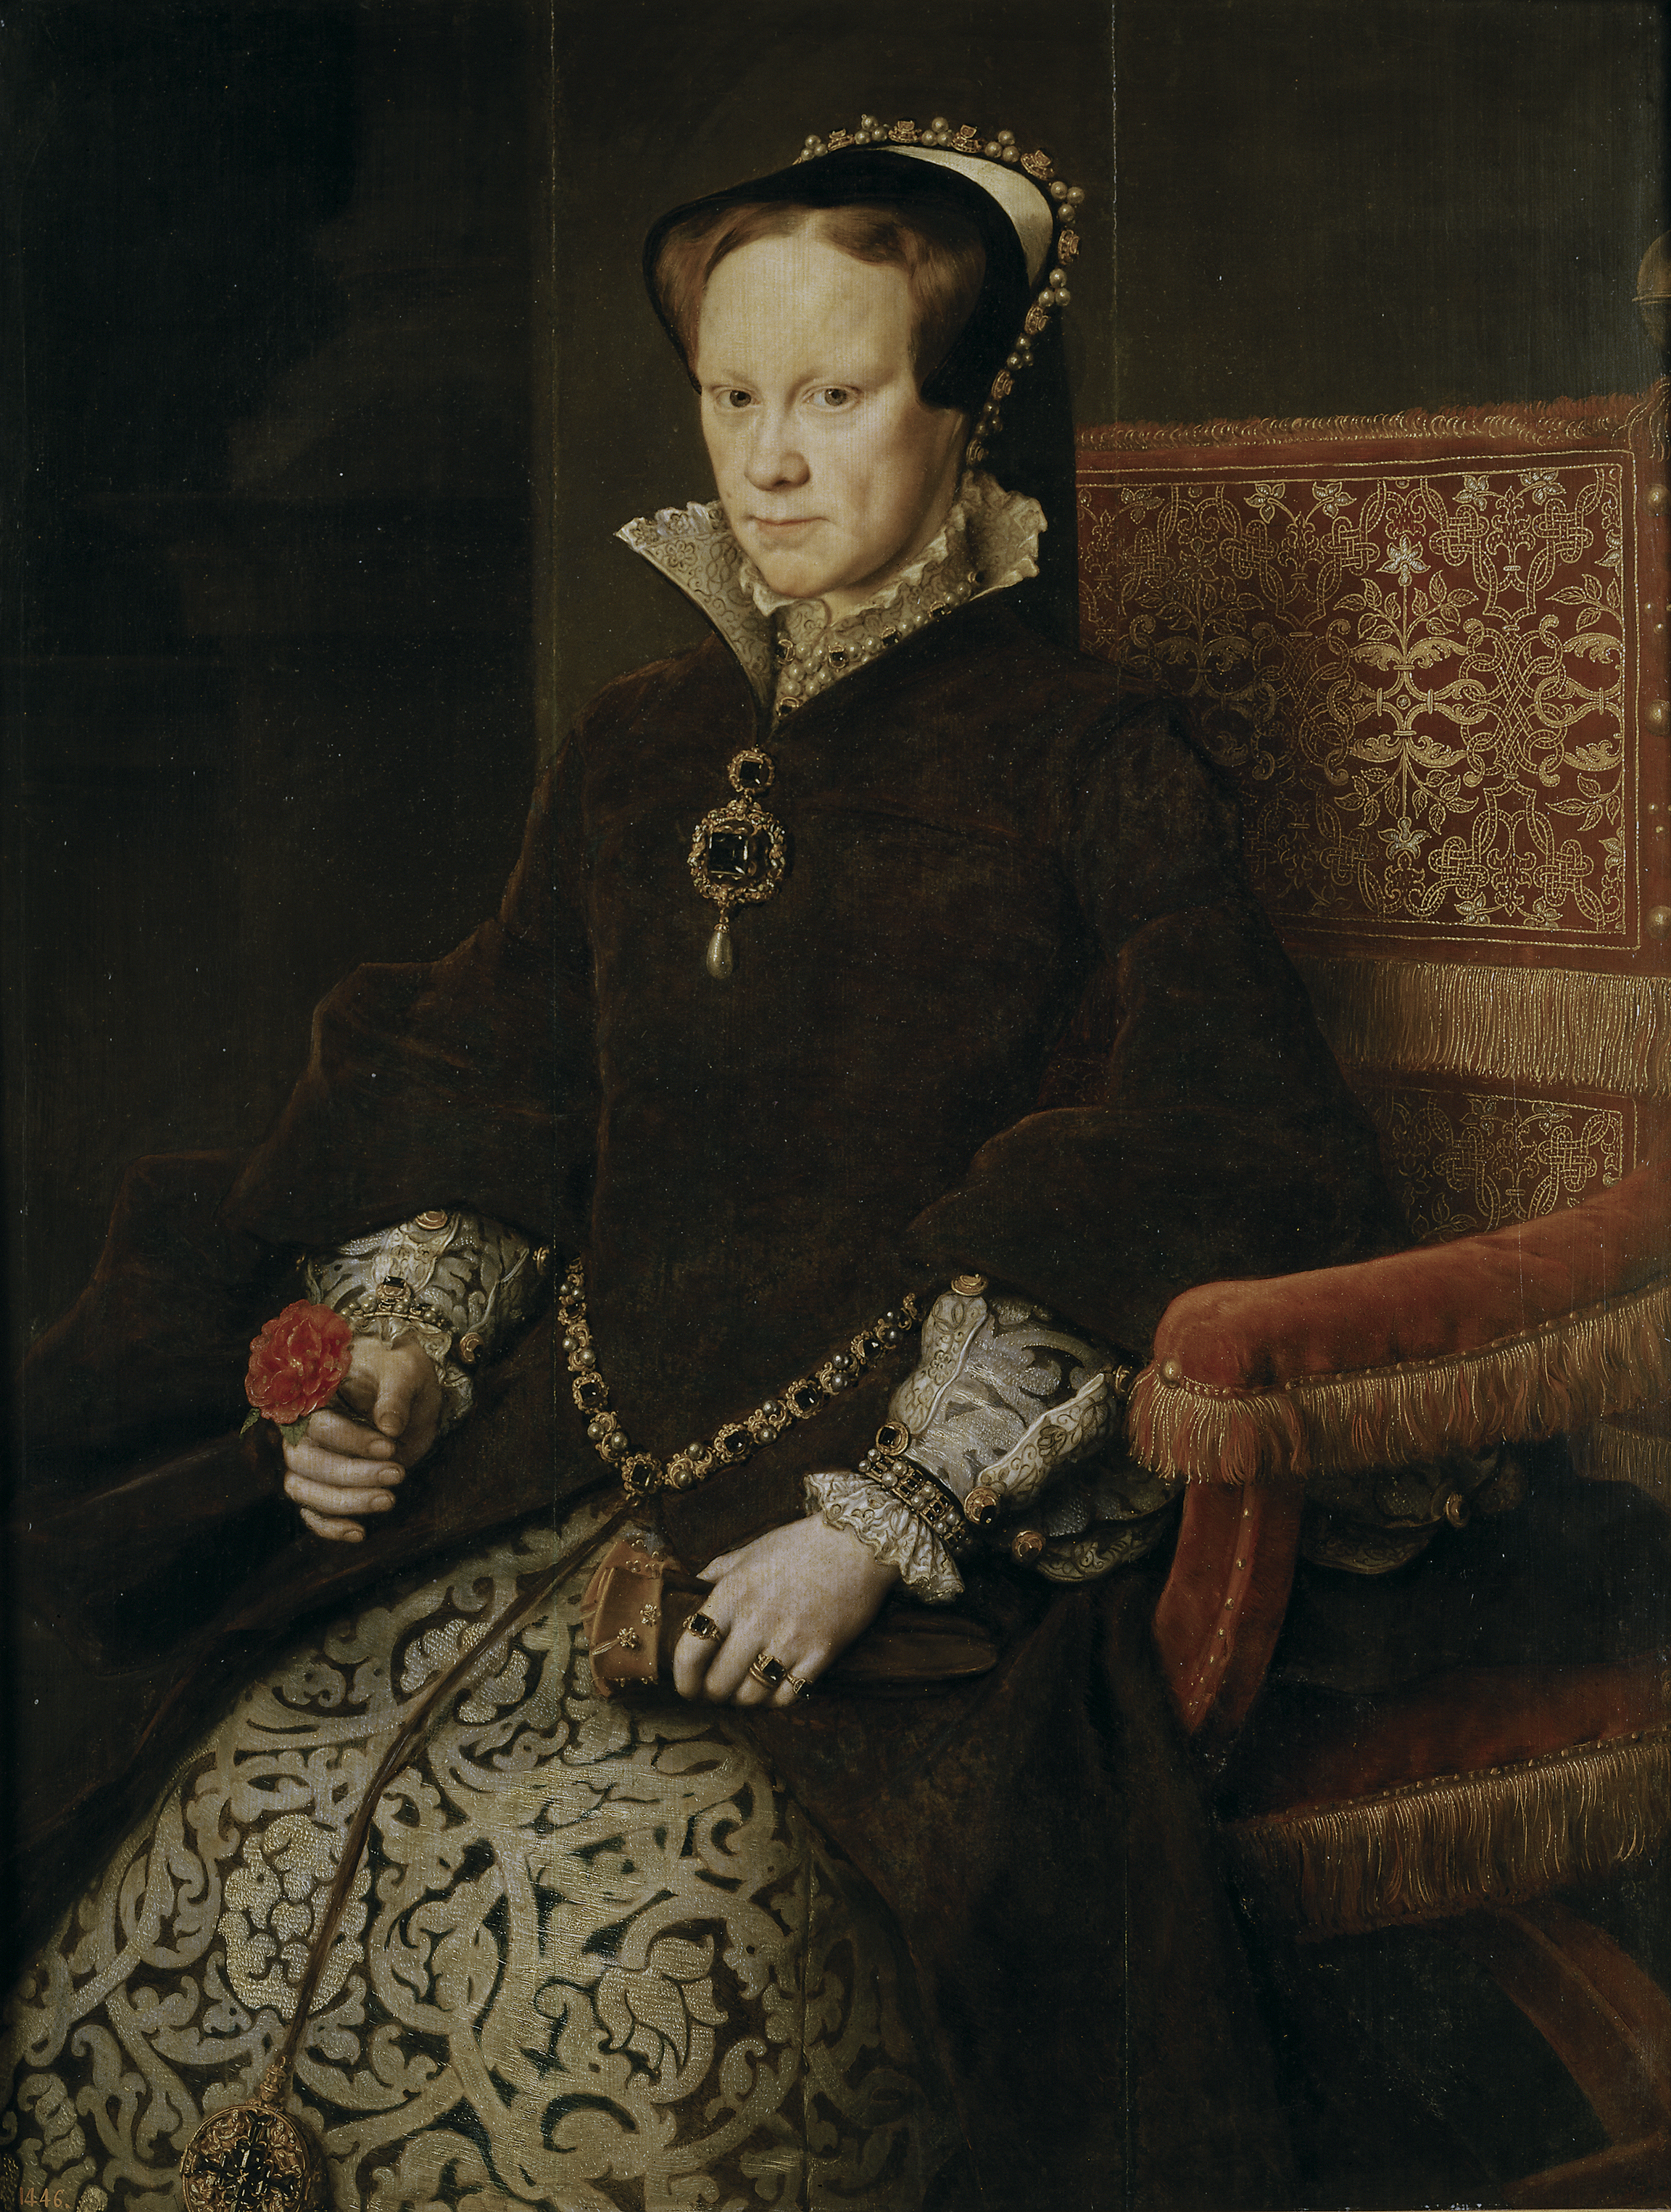 Mary I, "Bloody Mary". Portrait by Antonis Mor, 1554.